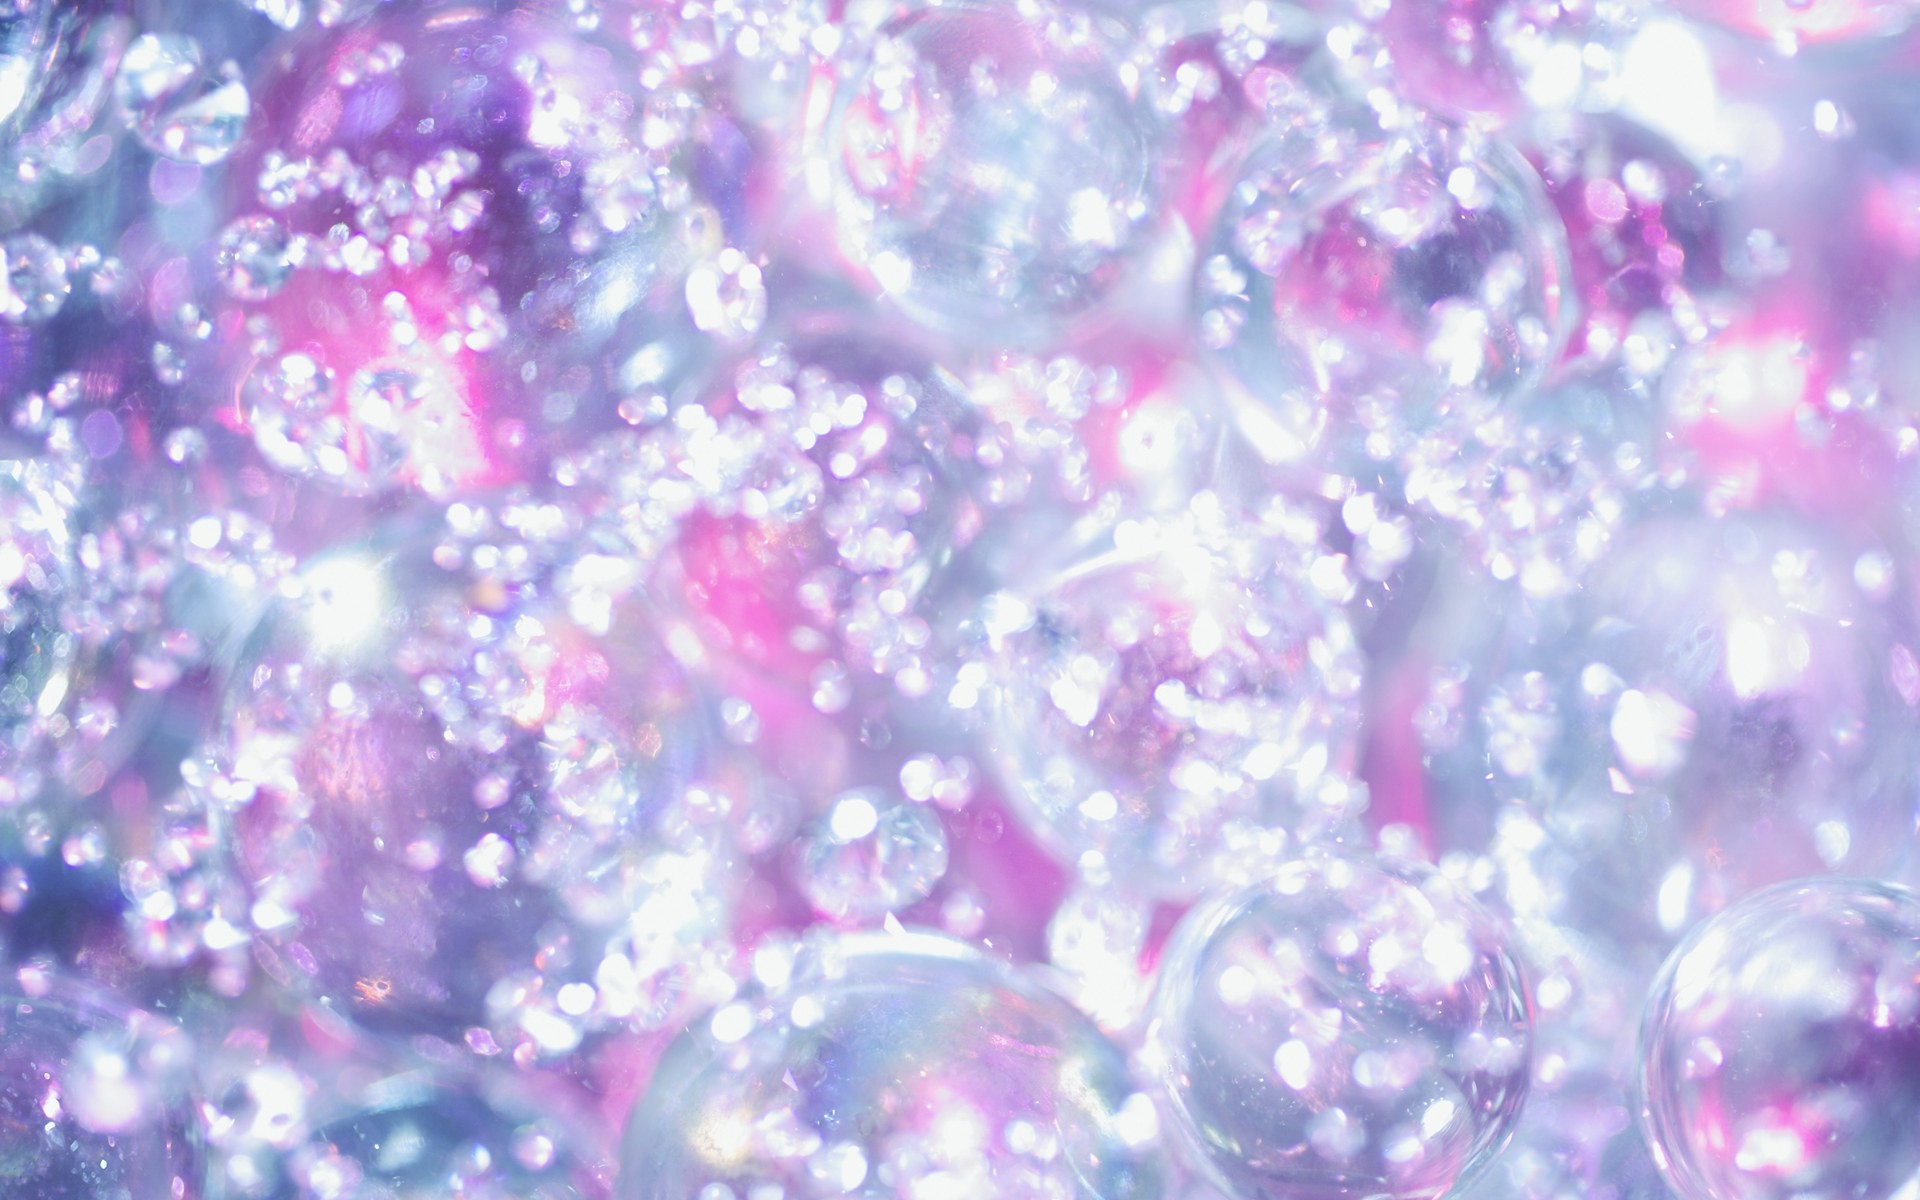 1920x1200 Sparkling Diamonds and Crystals - Romantic Sparkling Backgrounds 1920*1200  NO.15 Wallpaper